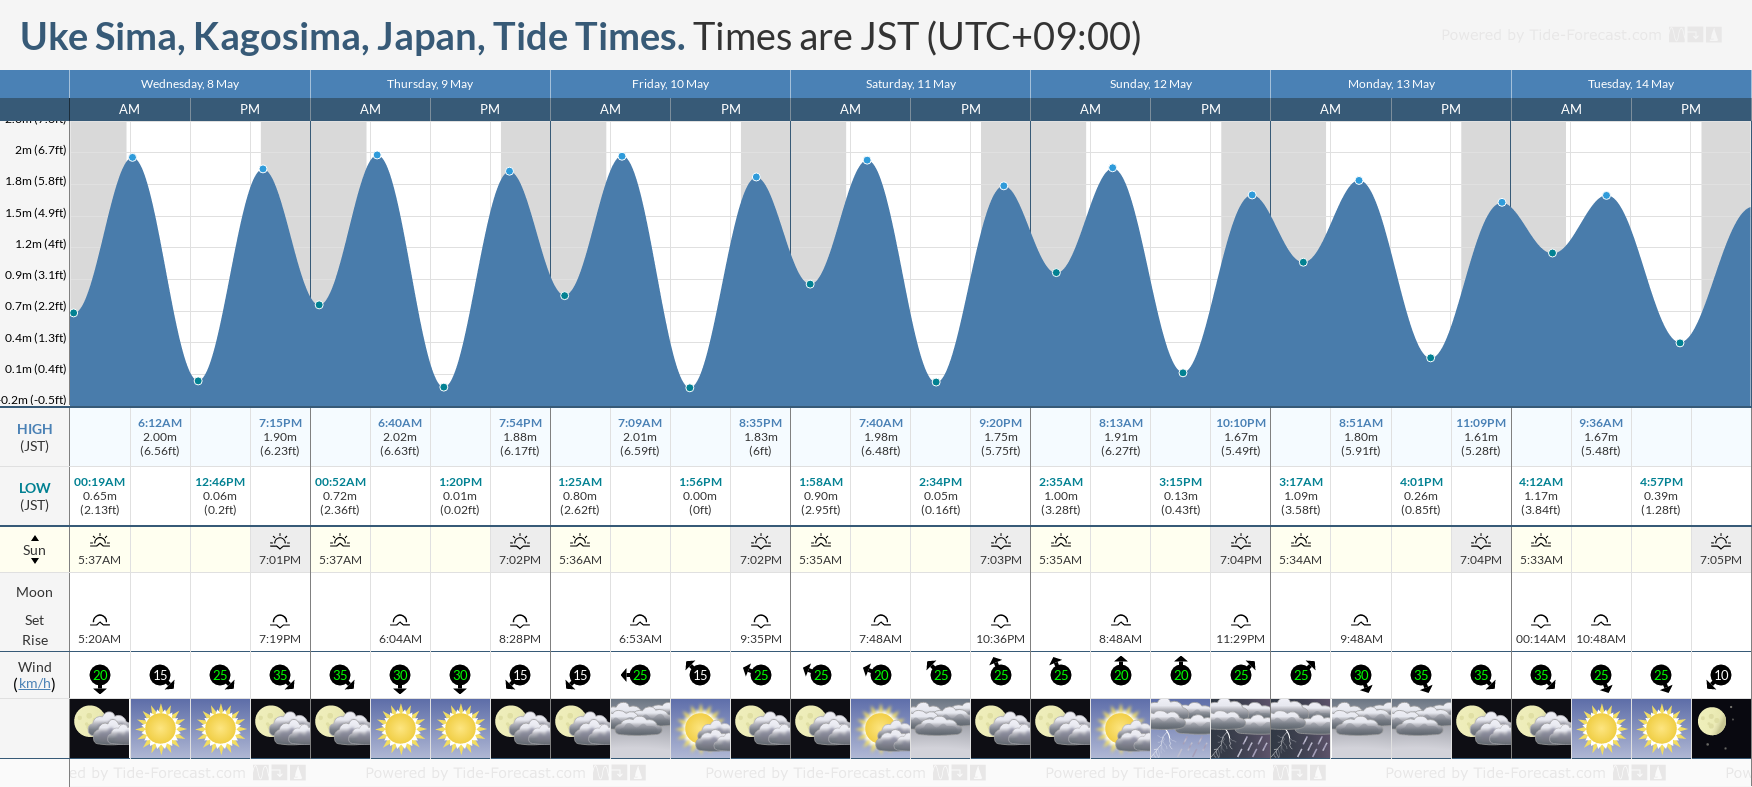 Uke Sima, Kagosima, Japan Tide Chart including high and low tide times for the next 7 days